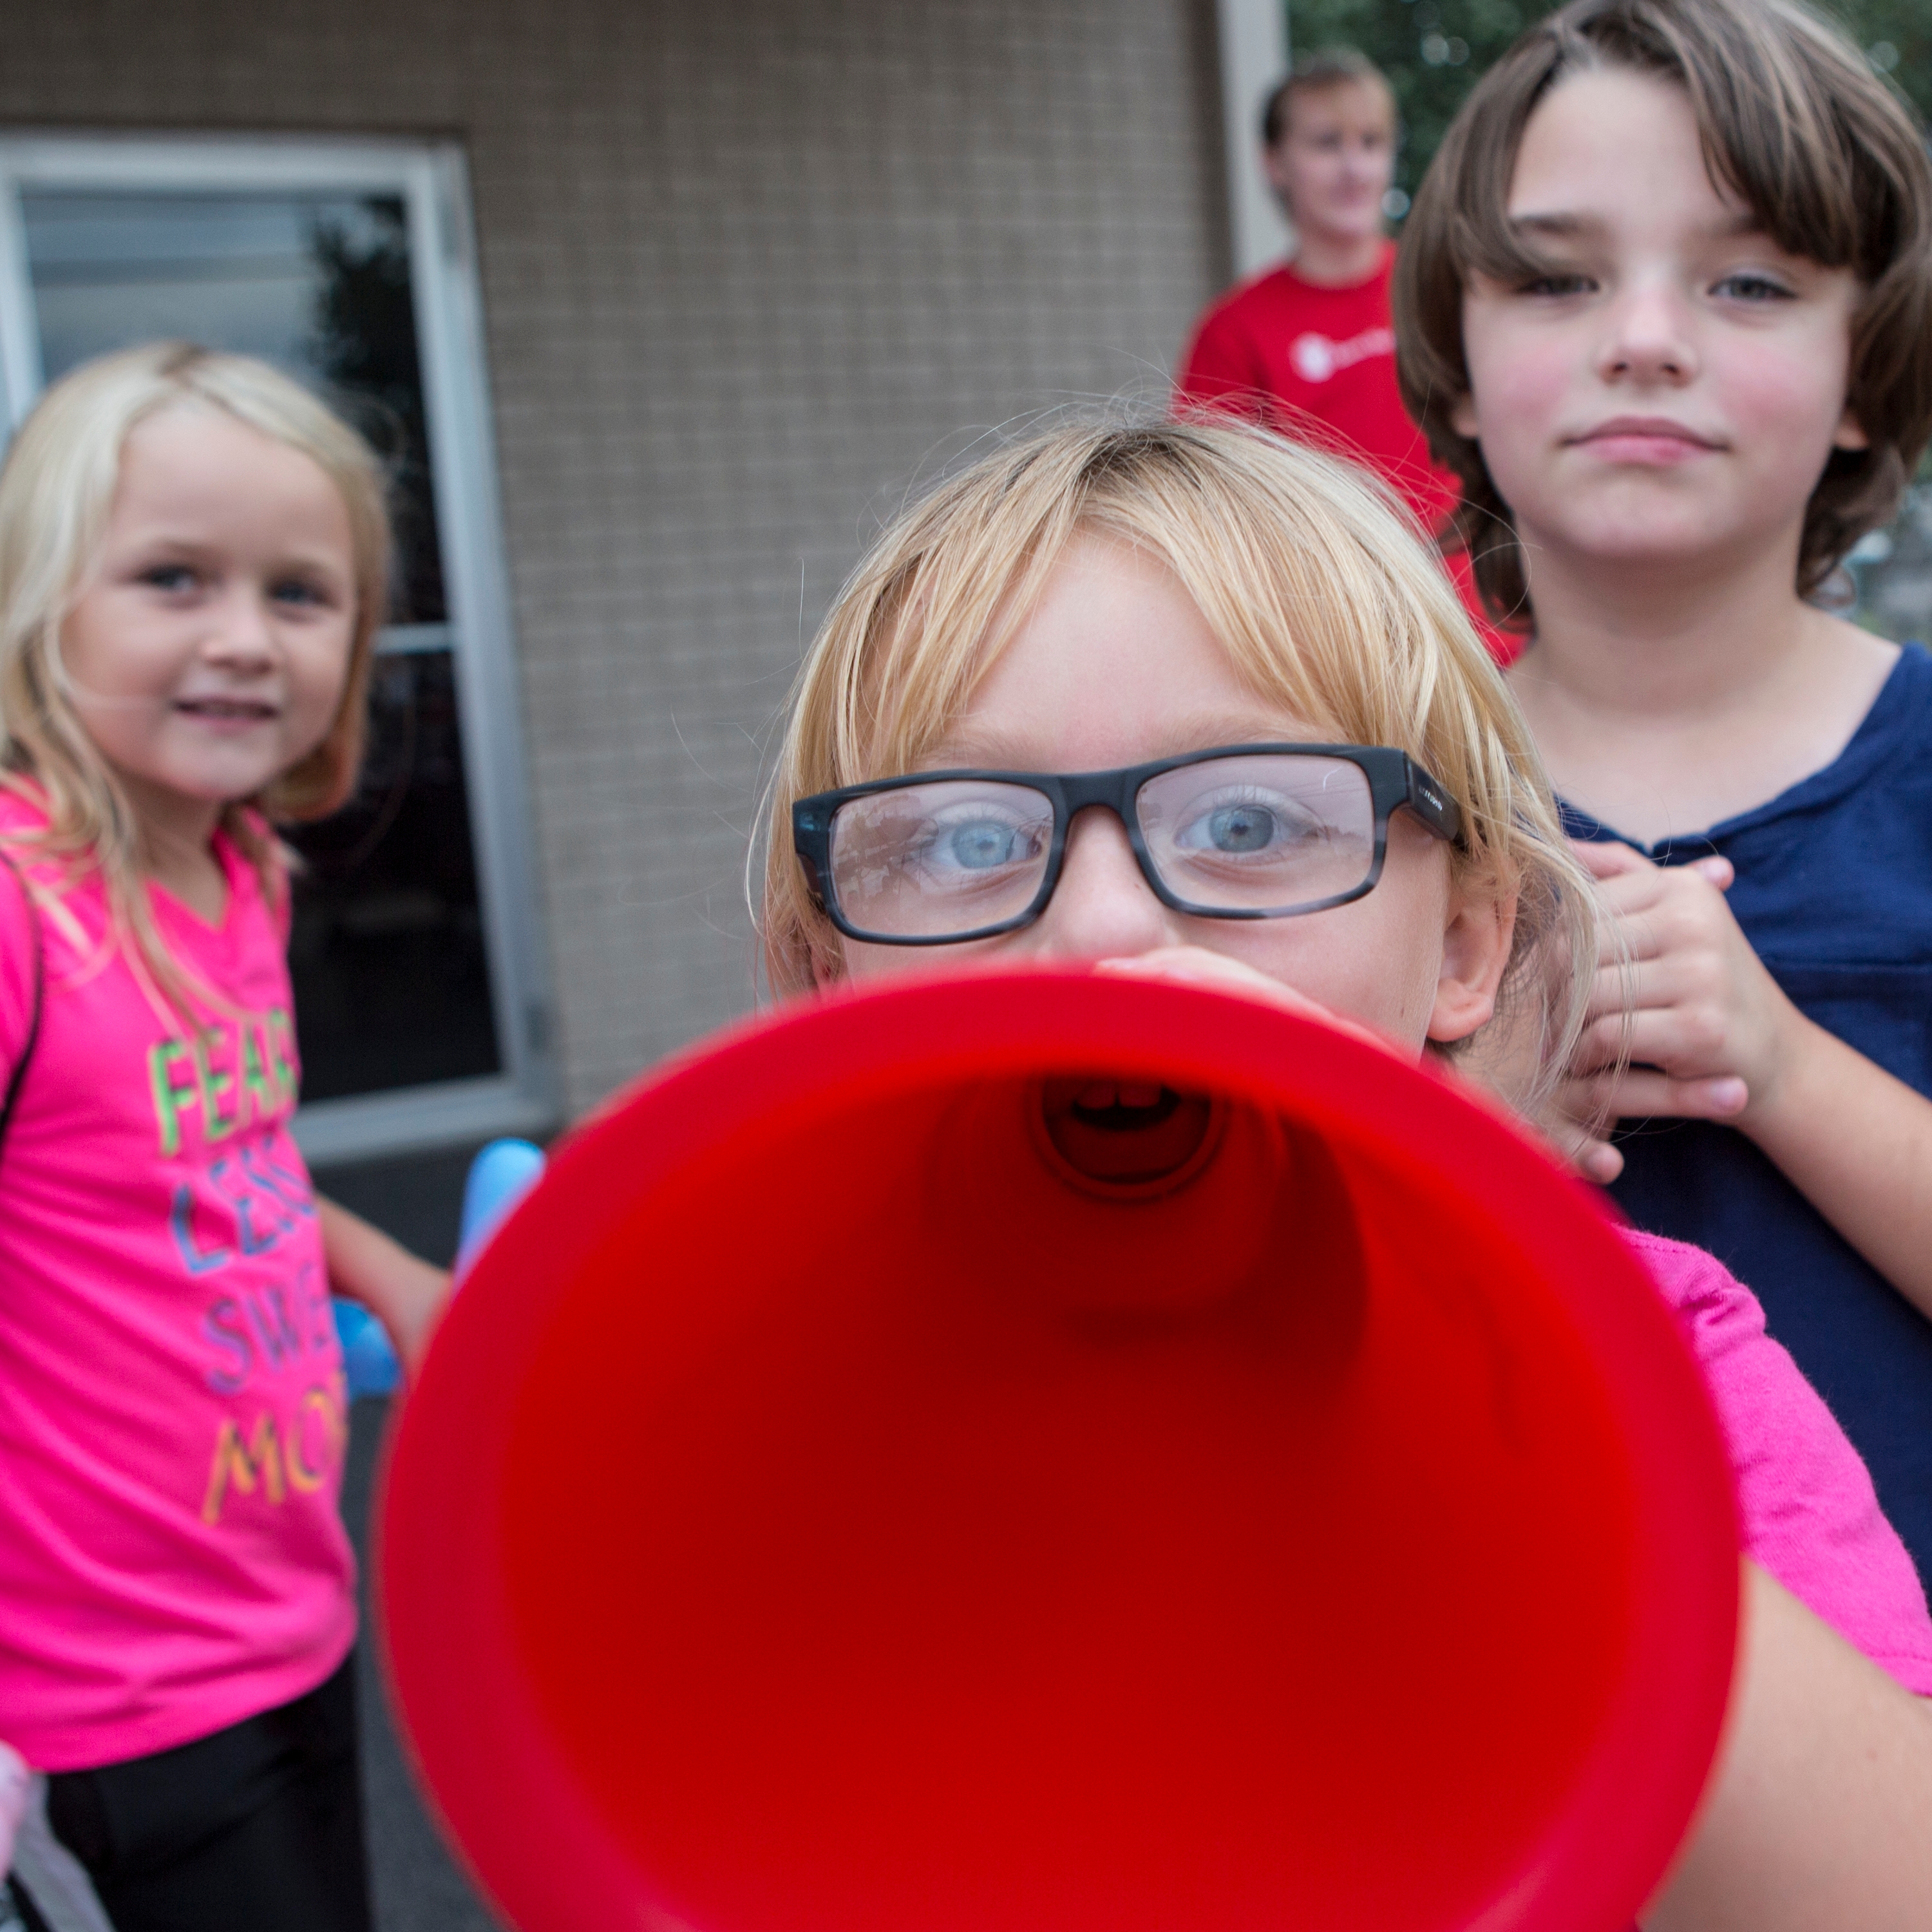 Children play outdoors with a megaphone at a celebration for the 20th anniversary of Agapeland Learning Center, in Moore, OK. In 2013, Save the Children helped reopen the center after a tornado ripped the roof off the building while children and teachers sheltered inside. Photo credit: Brett Deering/Save the Children, September 2016.